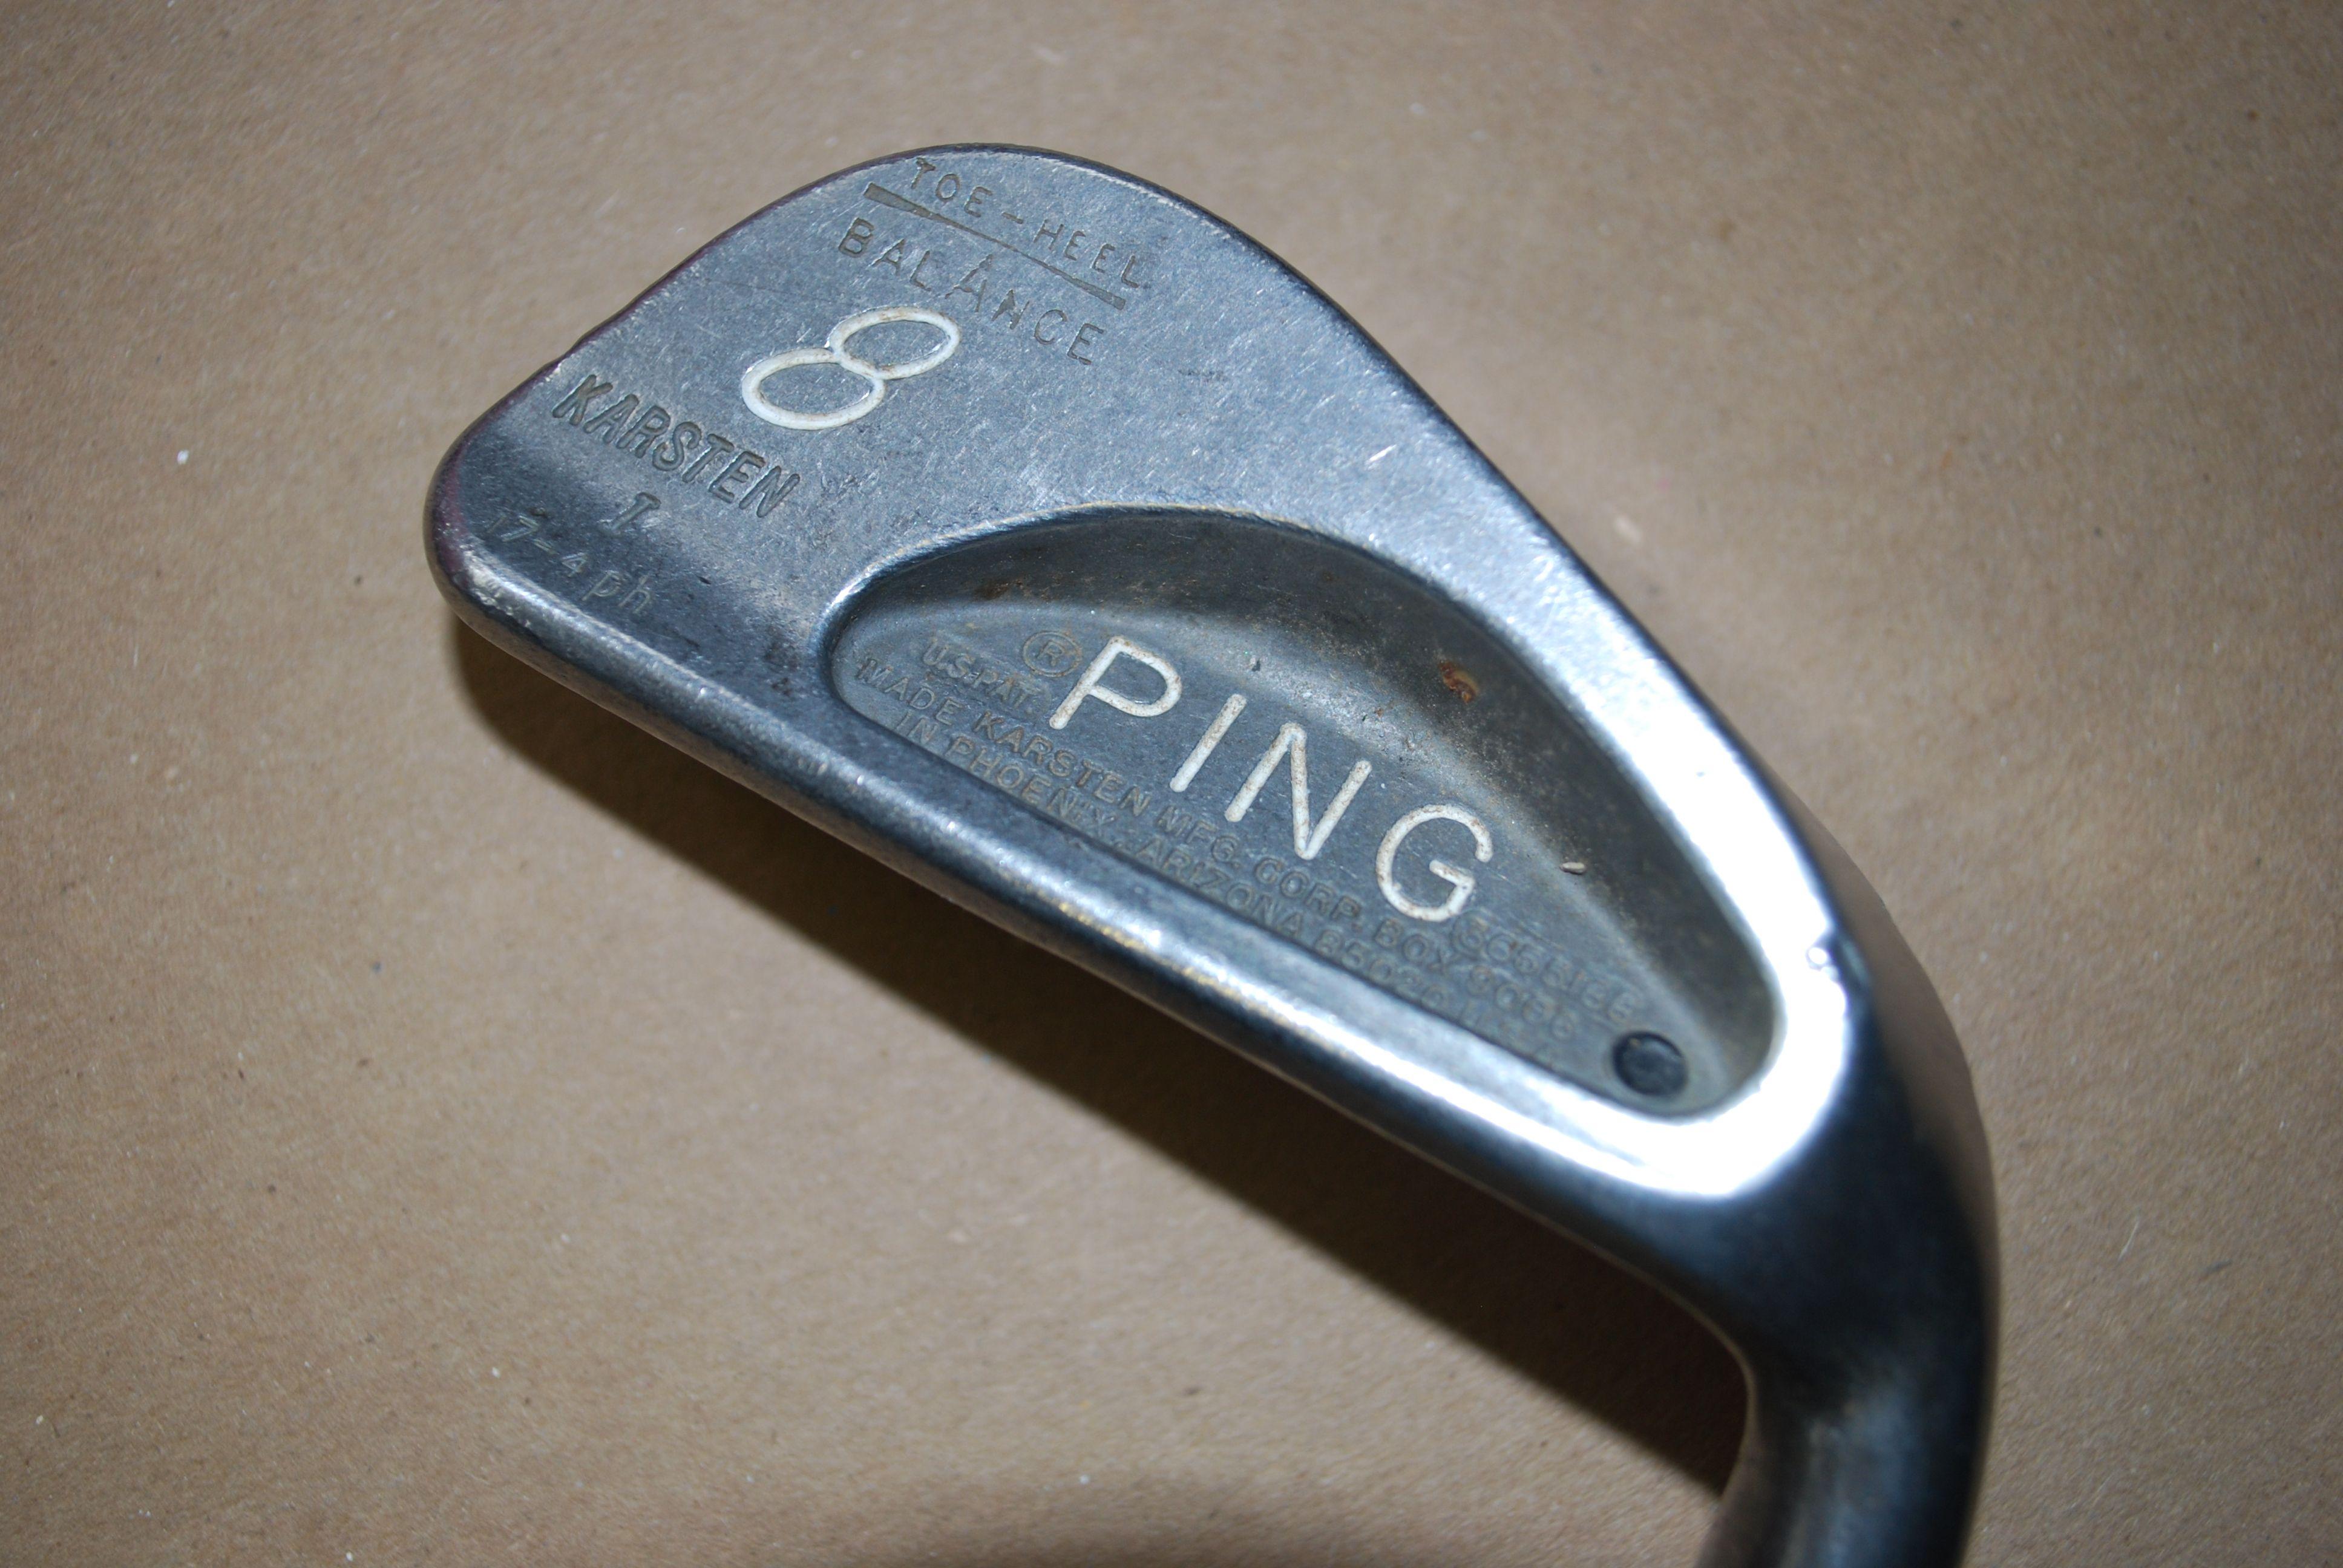 Old Ping Golf Logo - Value of old set of Pings. - Clubs, Grips, Shafts, Fitting - The ...